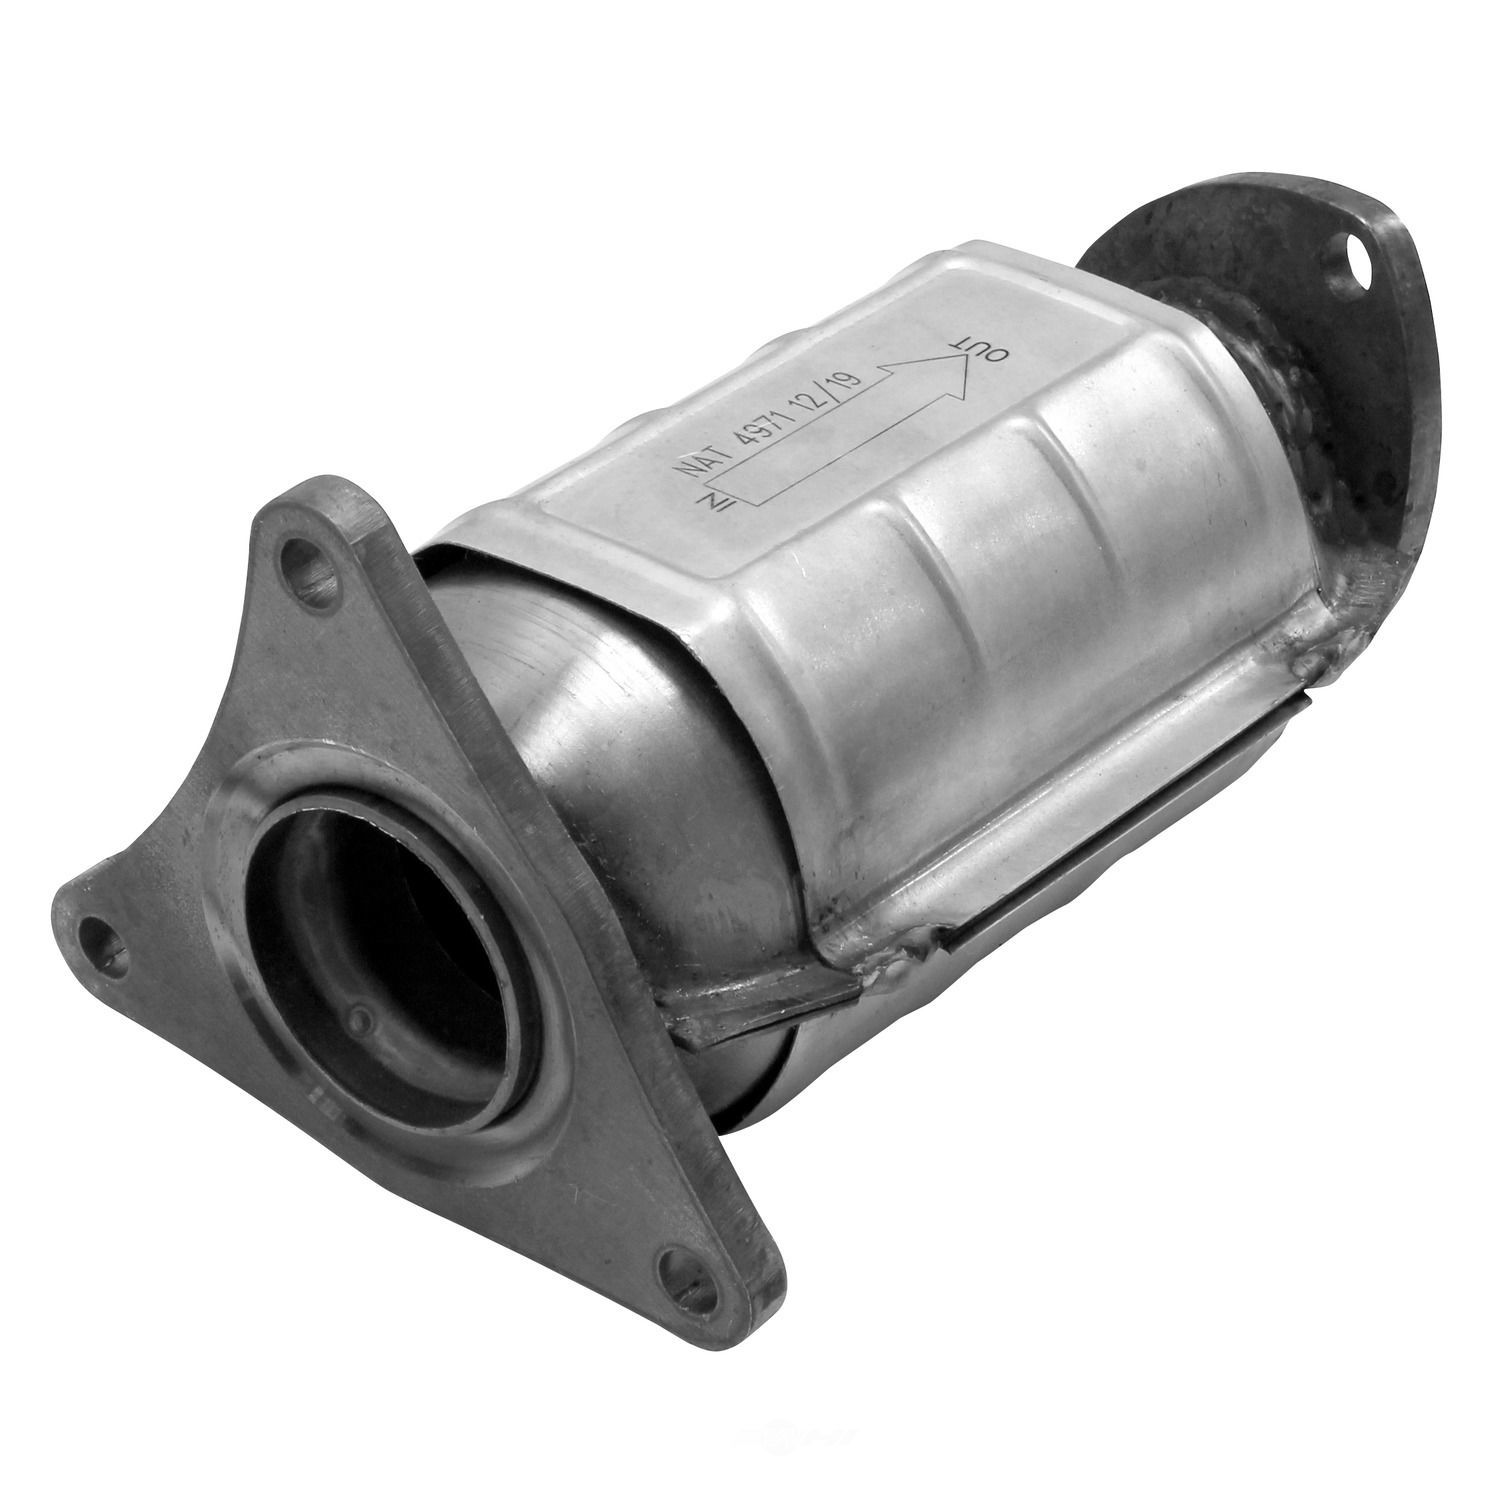 AP EXHAUST W/FEDERAL CONVERTER - Direct Fit Converter (Left) - APF 642702